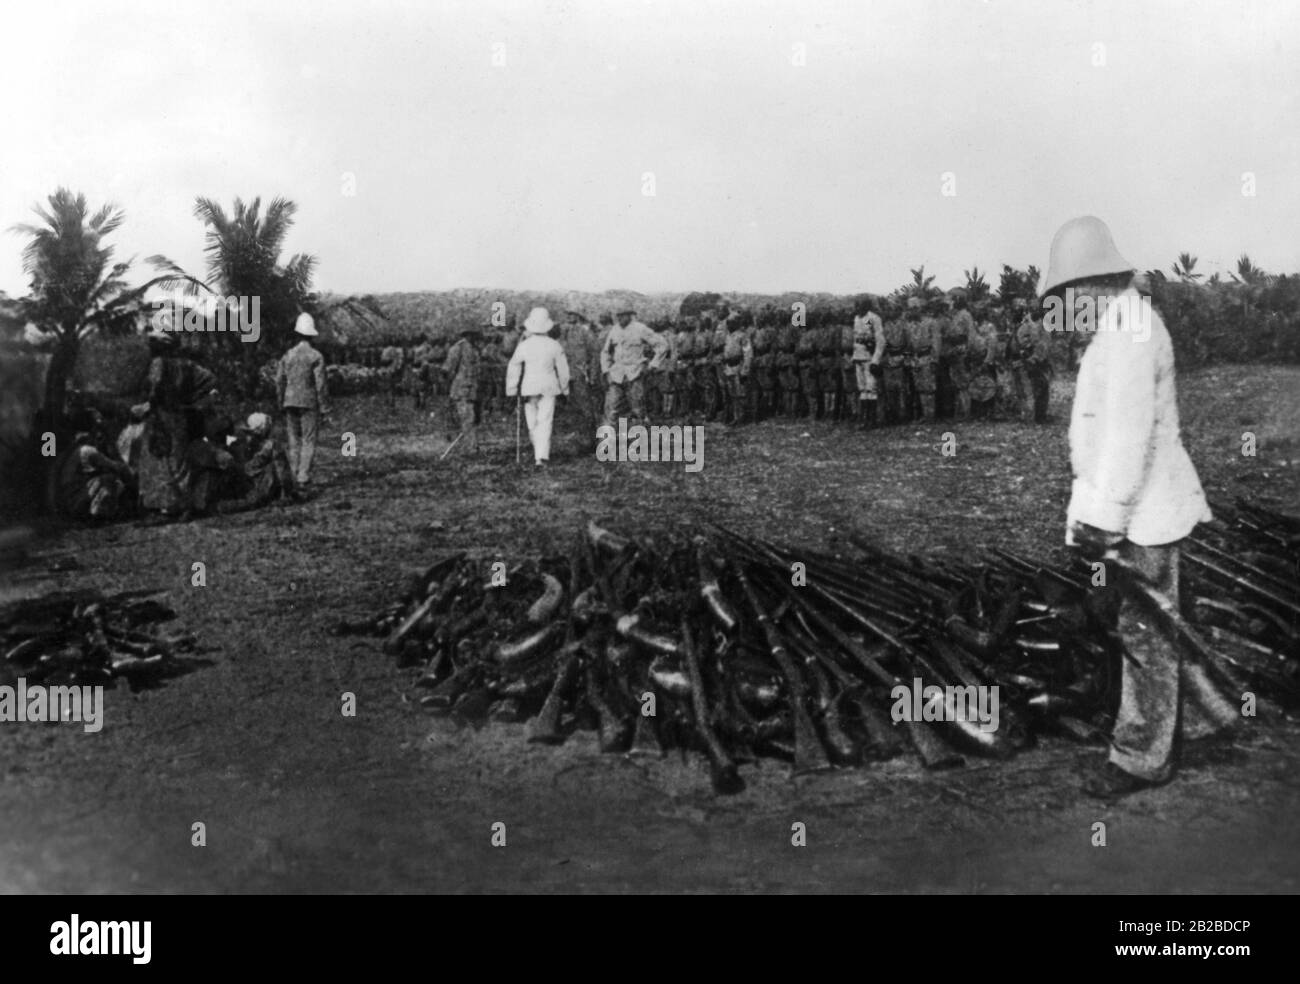 Lieutenant Willibald von Stuemer counts the rifles of the Mbaruk warriors after the capitulation. Sultan Mbaruk bin Rashid had not wanted to submit to the English in East Africa and had trespassed to German territory. After negotiations with the Germans, his troops were forced to give their weapons to the German colonial administration. Stock Photo